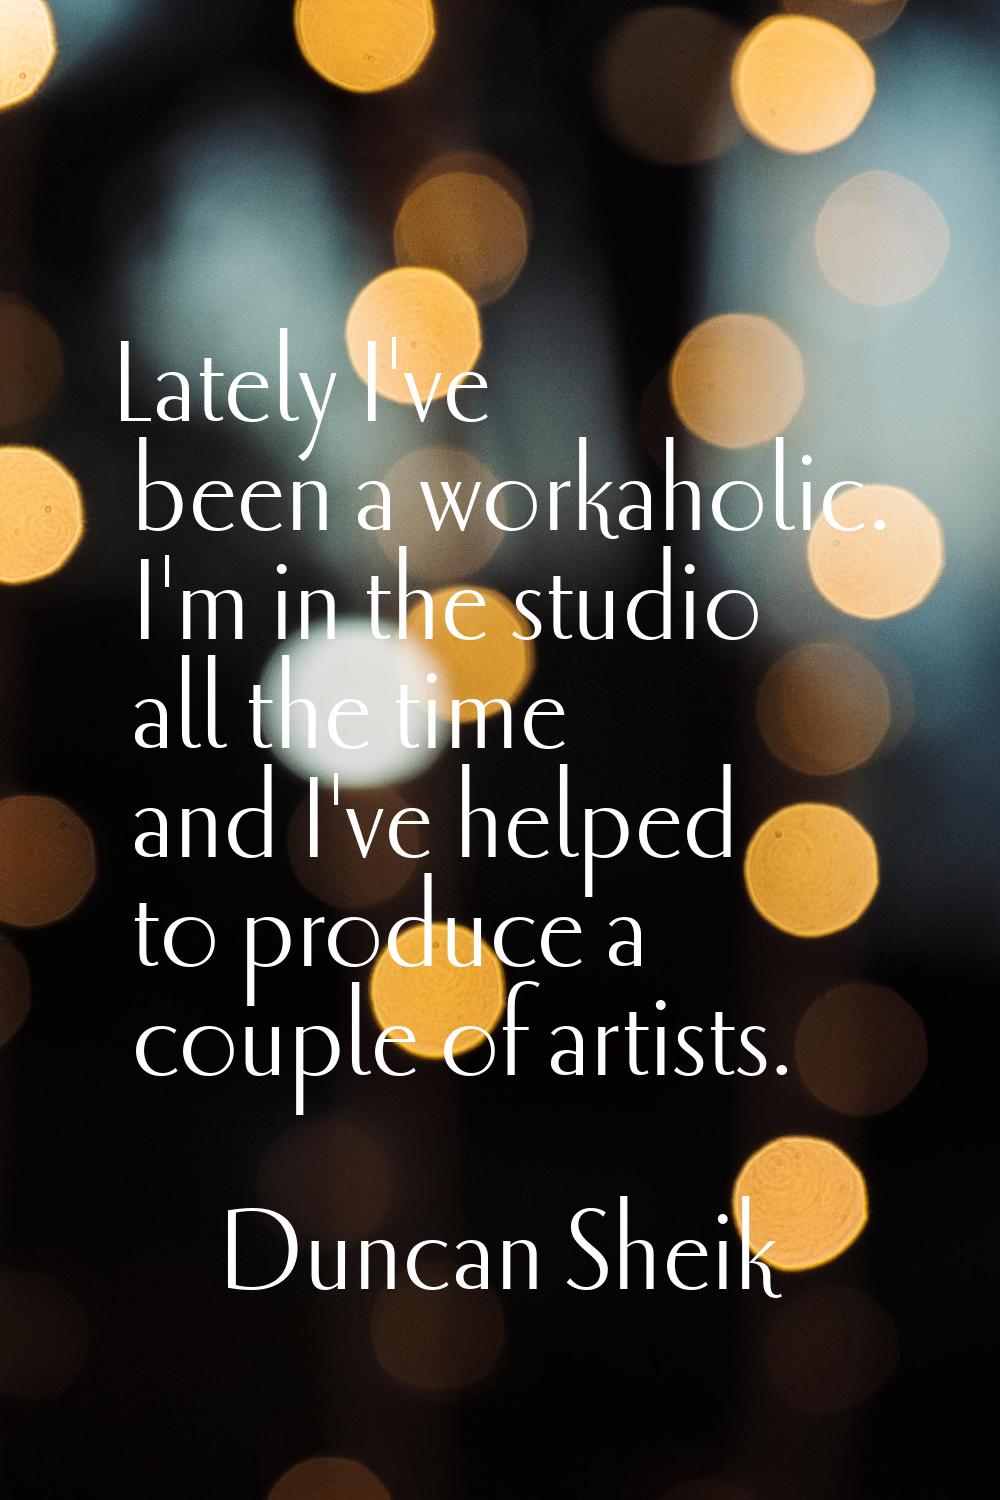 Lately I've been a workaholic. I'm in the studio all the time and I've helped to produce a couple o